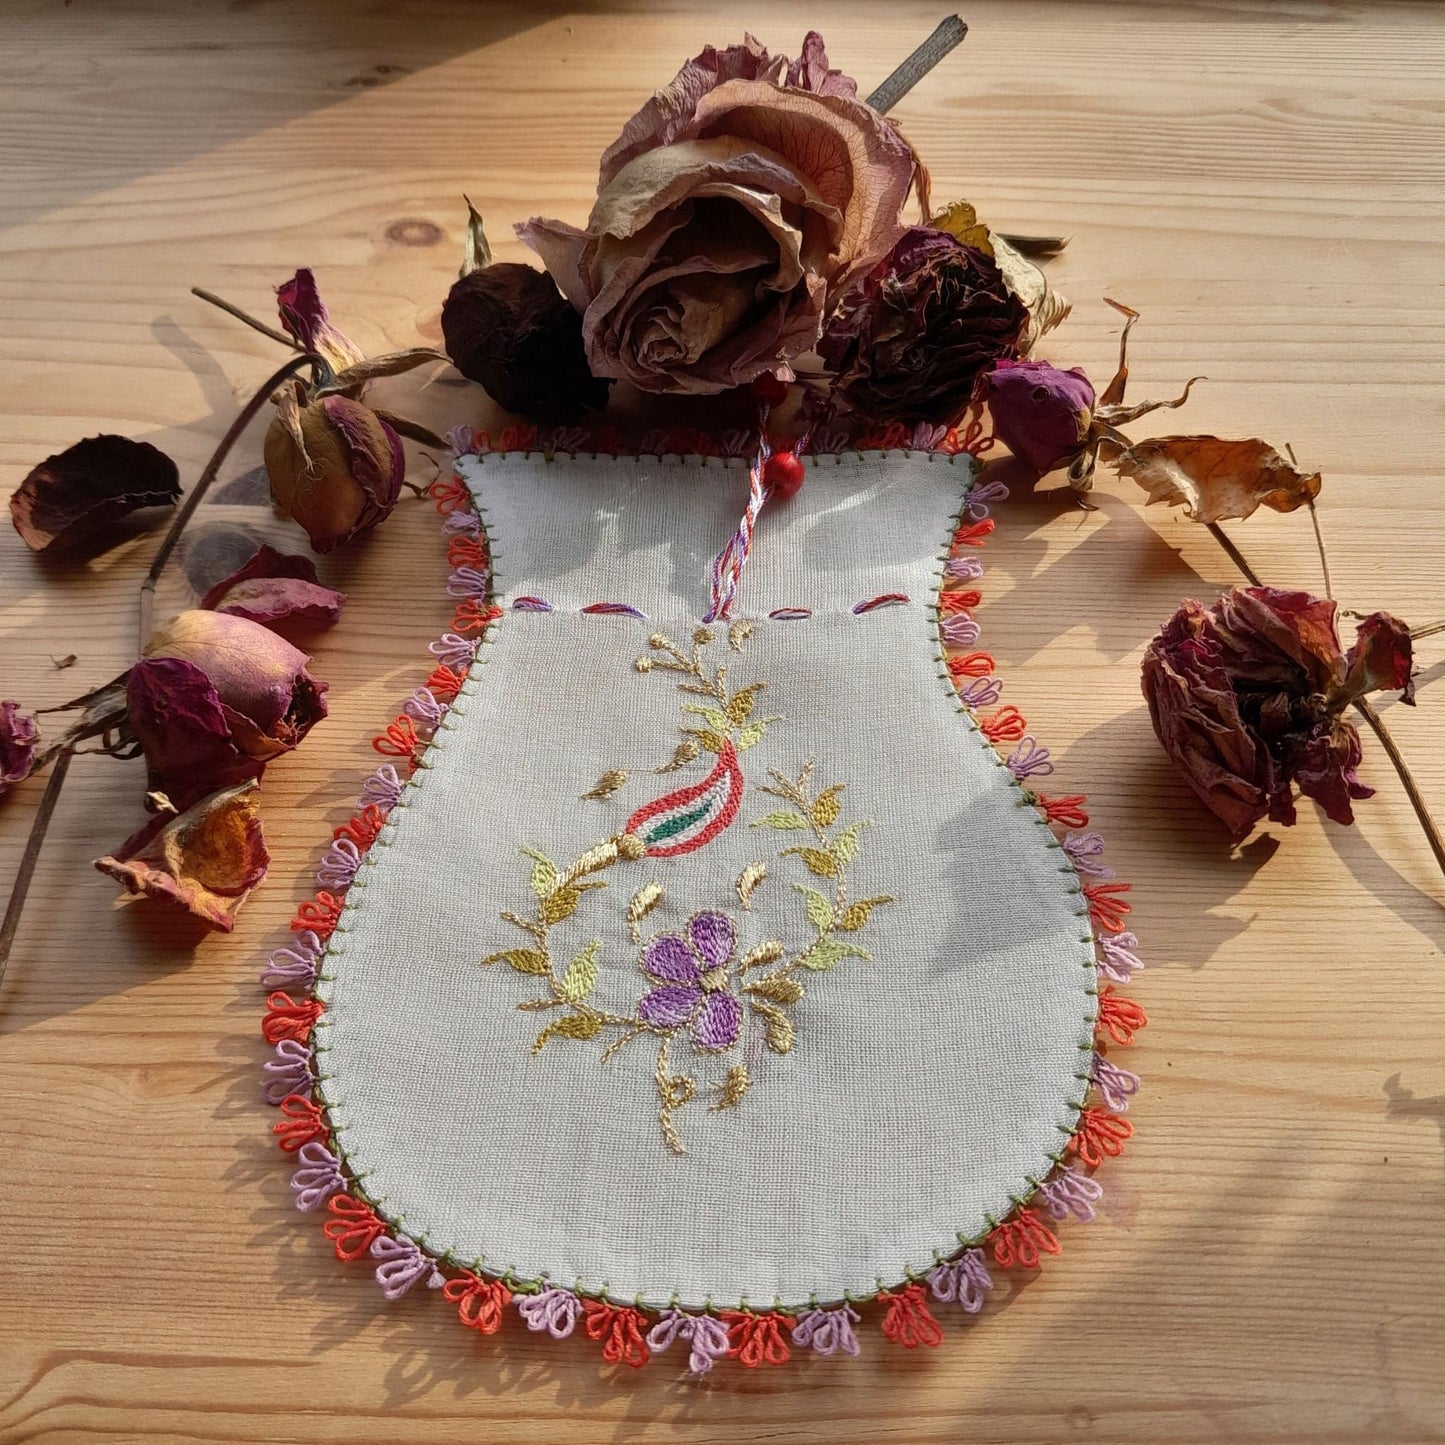 Small Handmade Turkish Silk Pouches, lilac and orange flower motif, cream colour organza, traditional Turkish floral design, needle lace hem, embroidered floral pattern